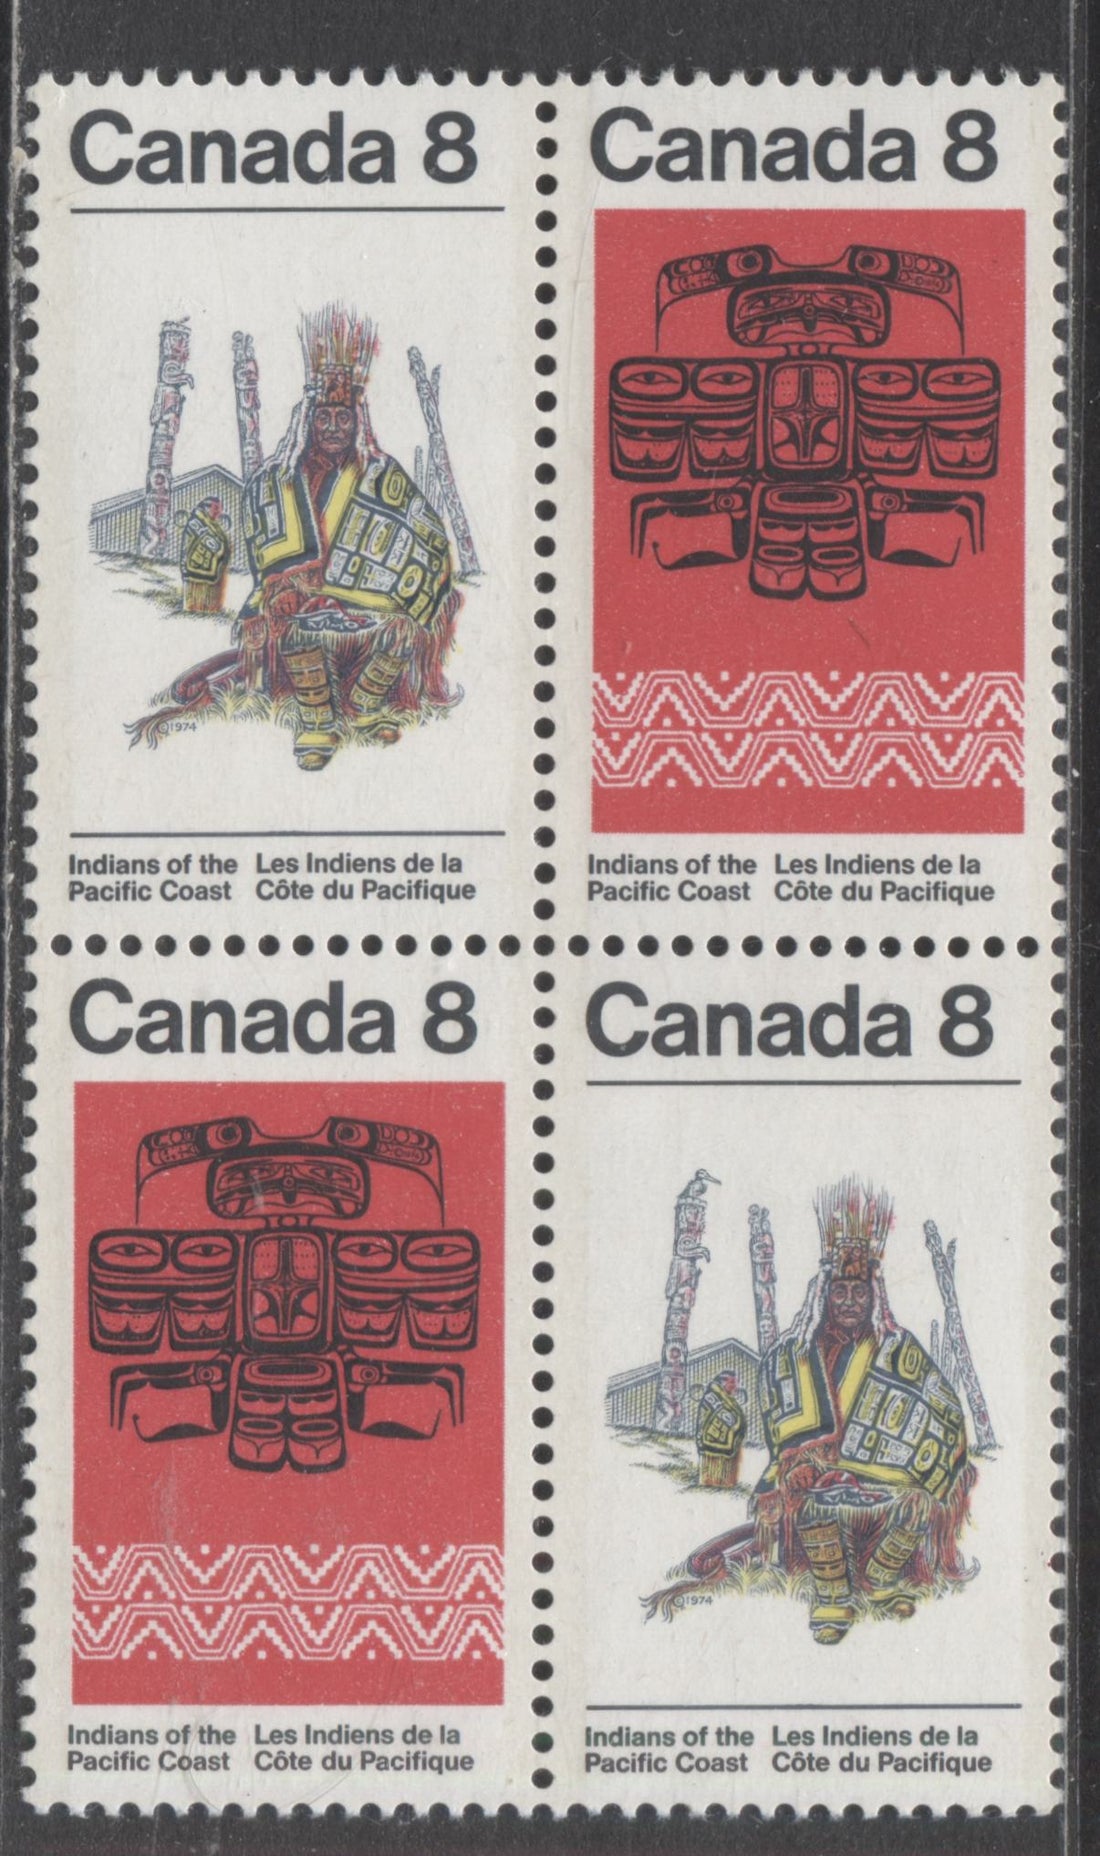 The Commemorative Issues of 1973-1976